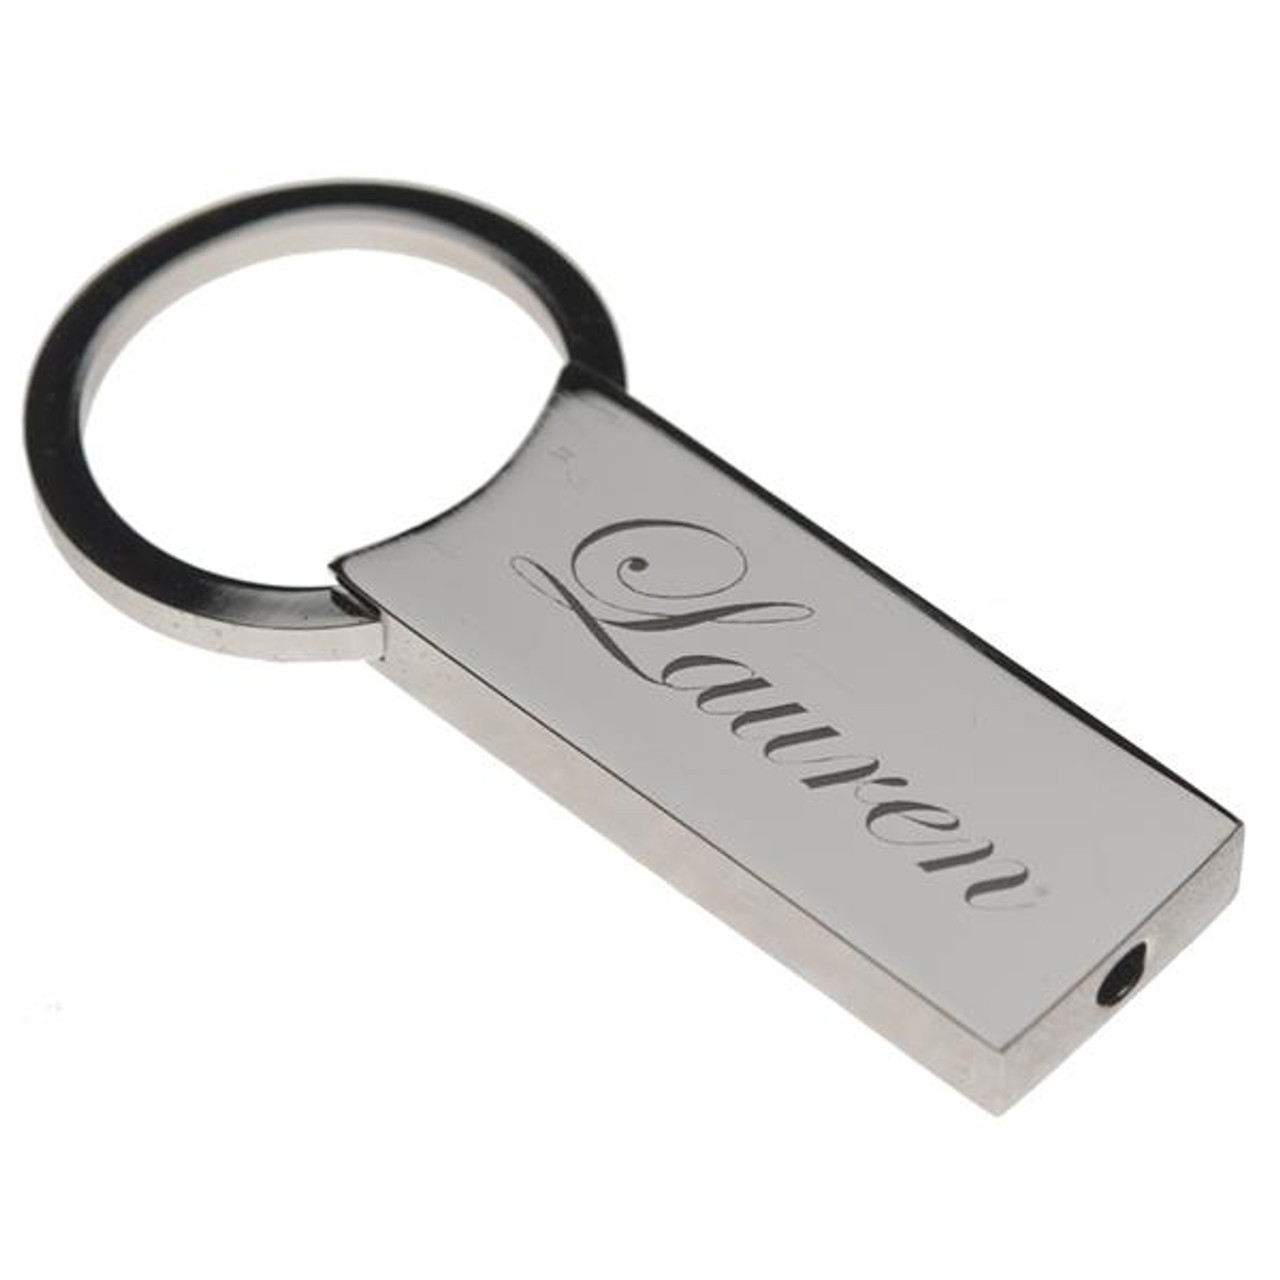 Leather Keychains 10 Packs - Double-Sided Personalization Ready Keychains